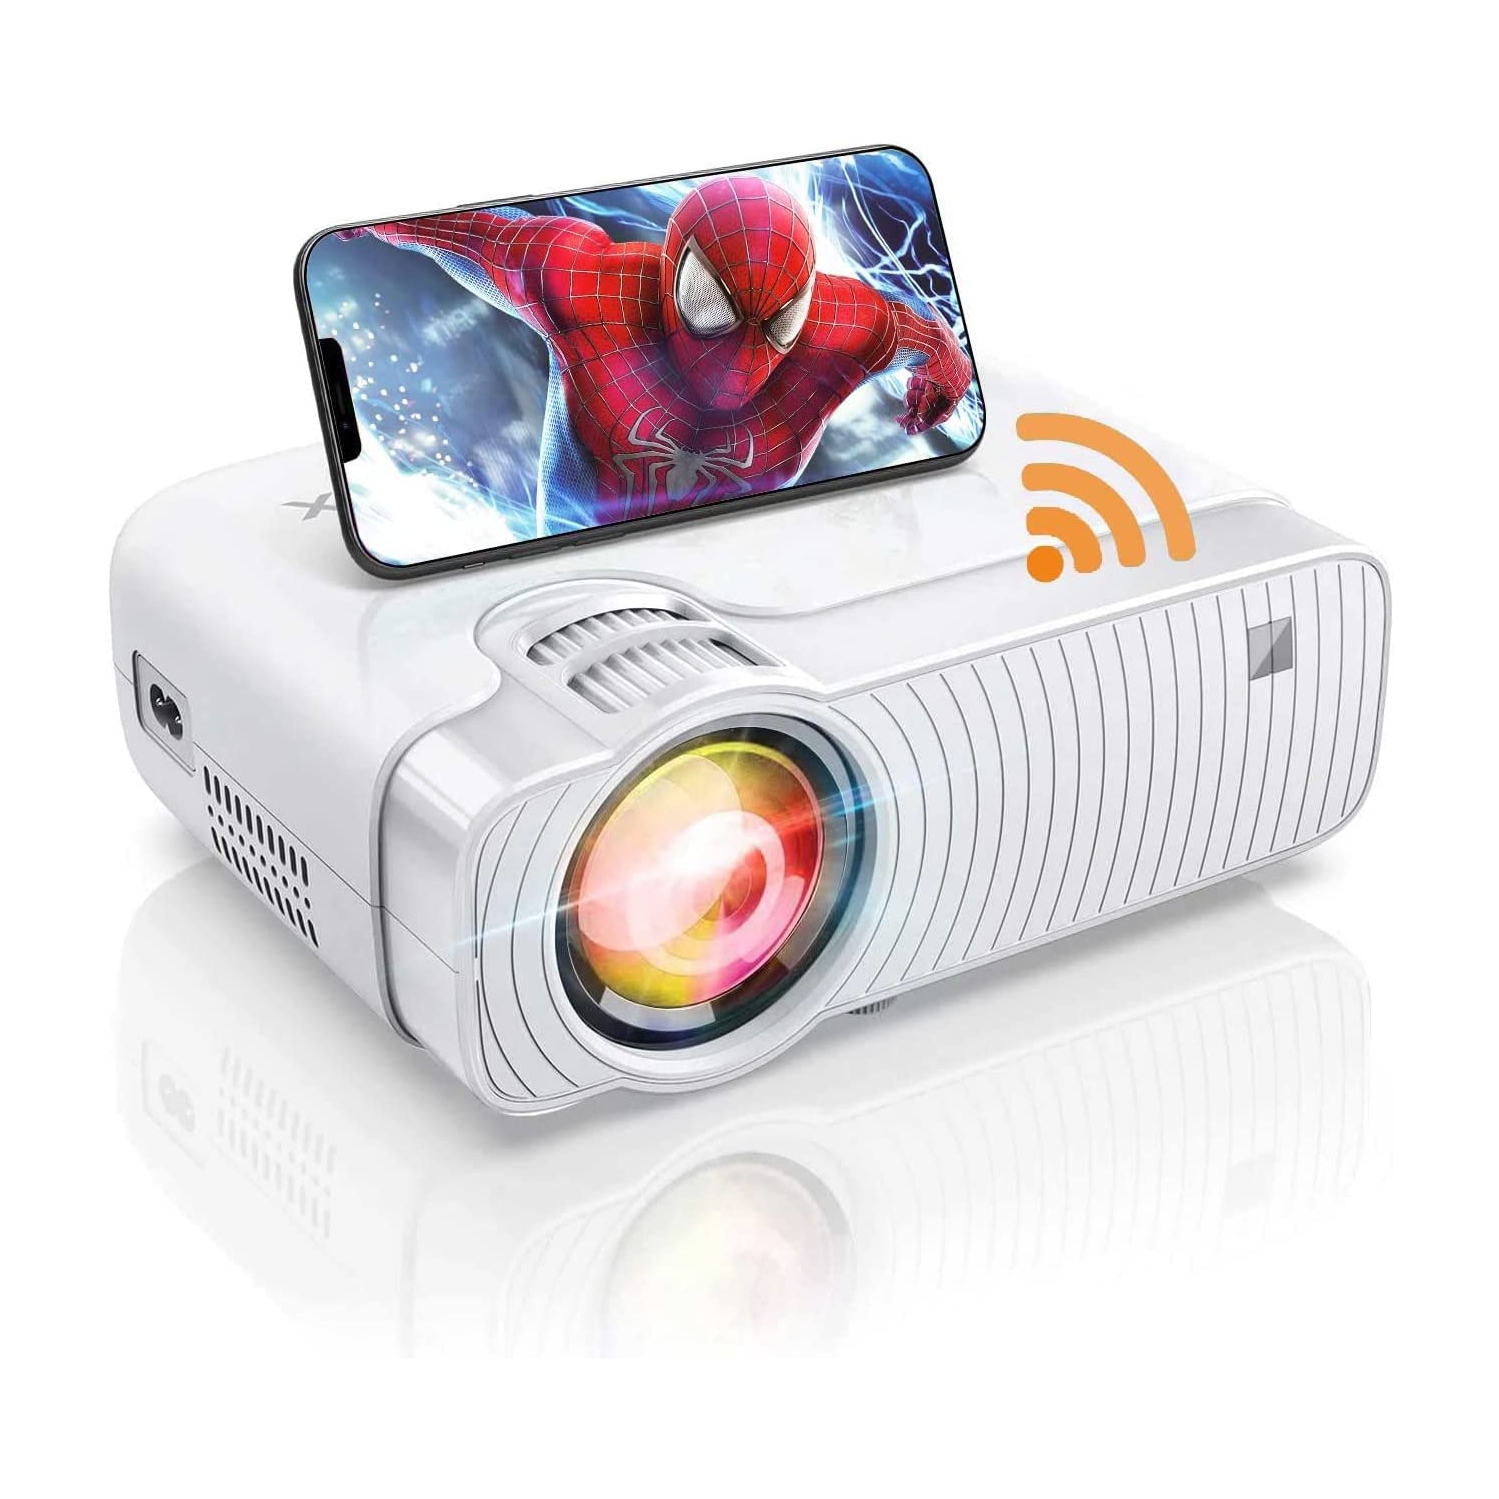 Bomaker GC357 Projector, WiFi Projector with 720P SSupported, Compatible with TV Stick, iOS, Android, PS4, HDMI, USB, TF, VGA, AUX, AV